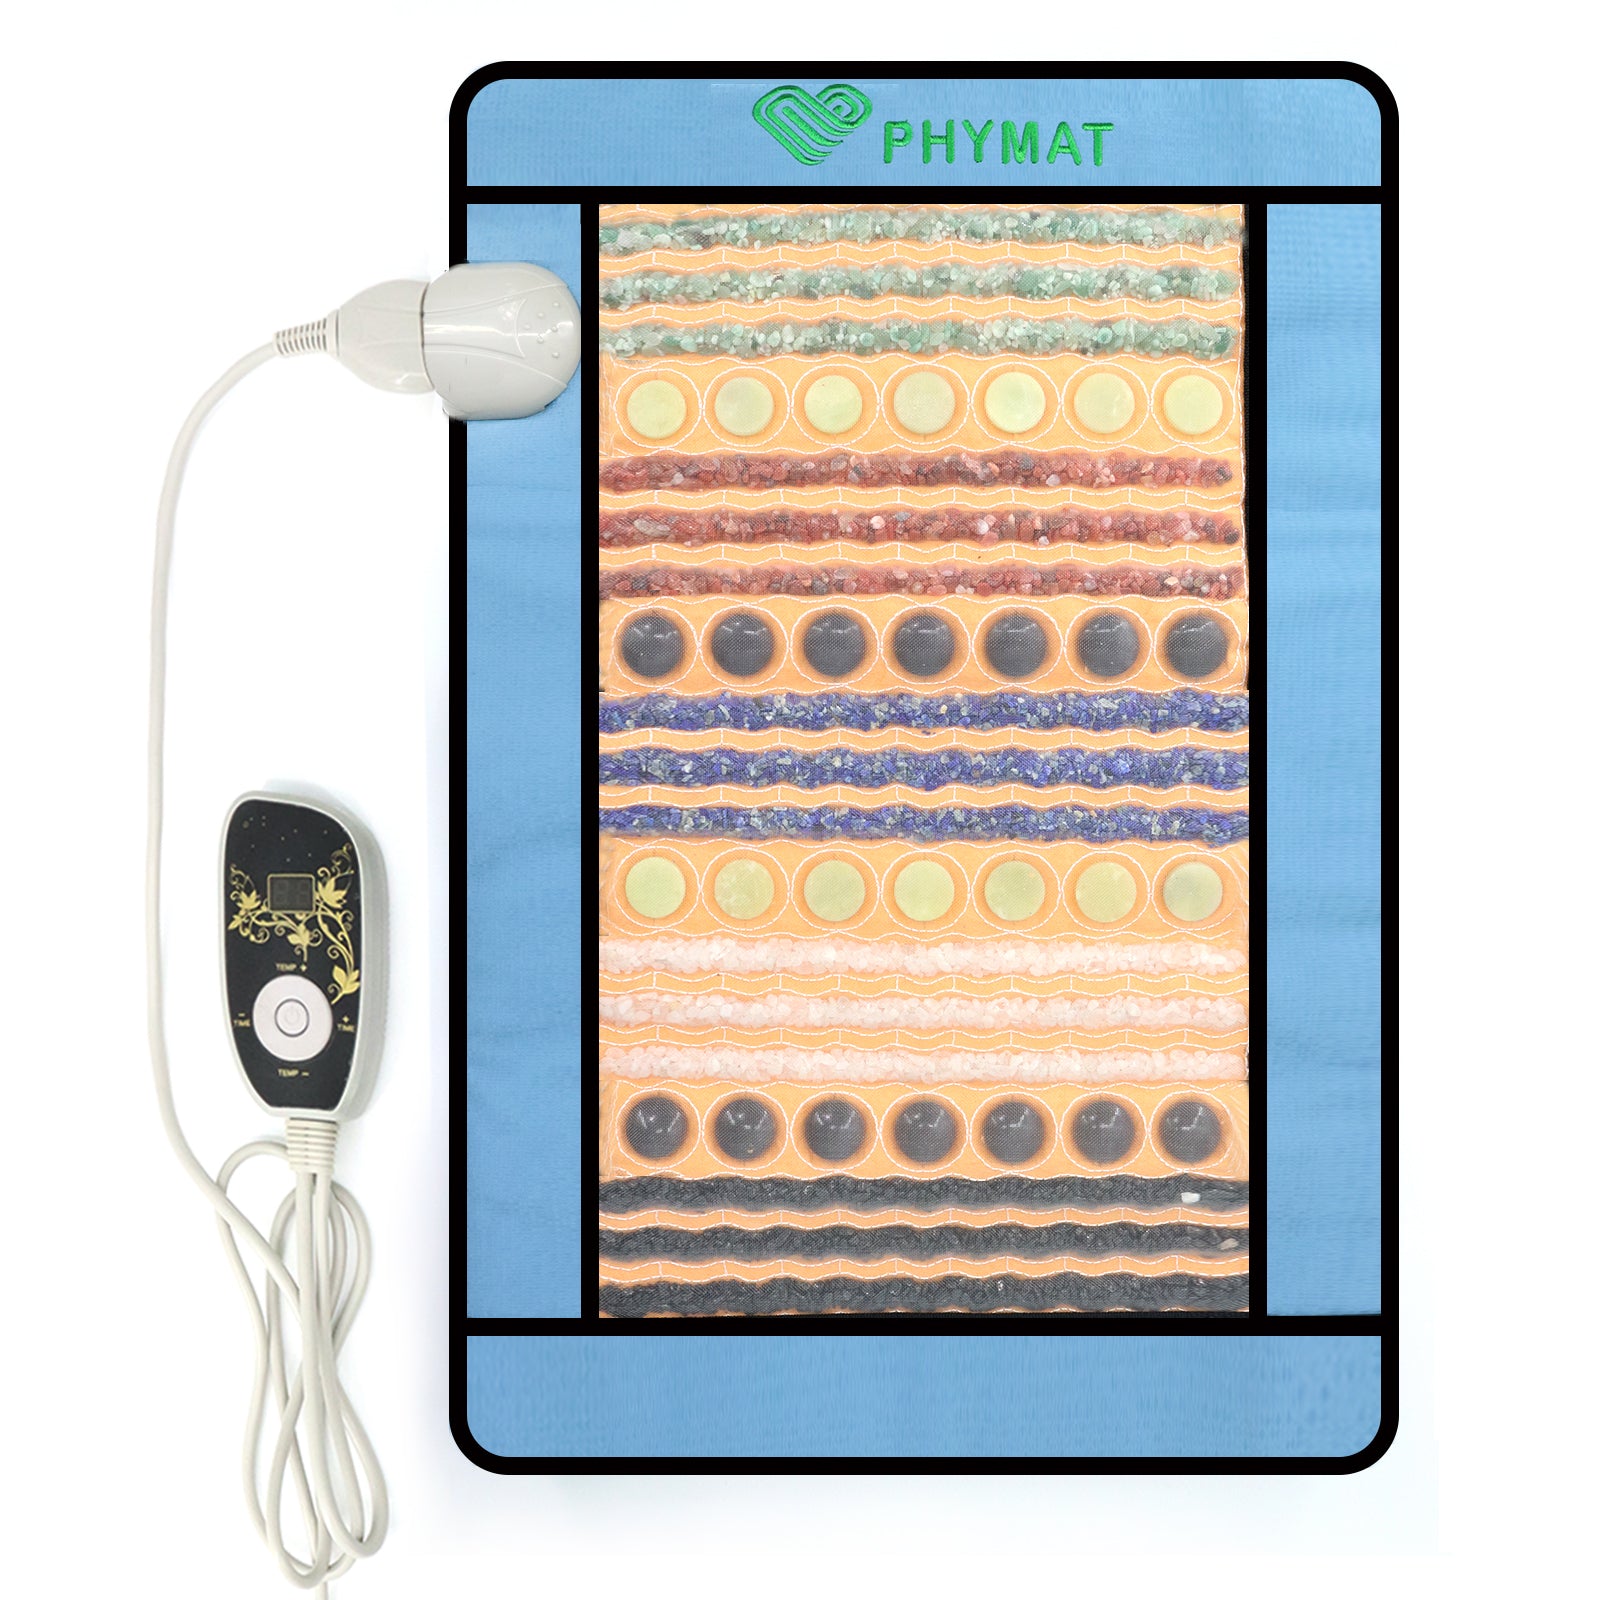 PHYMAT Far Infrared Heating Pad for Full Back Infrared Mat - 7 Kind Natural Gemstone Crystal (23"x16") US 110V PHYMAT